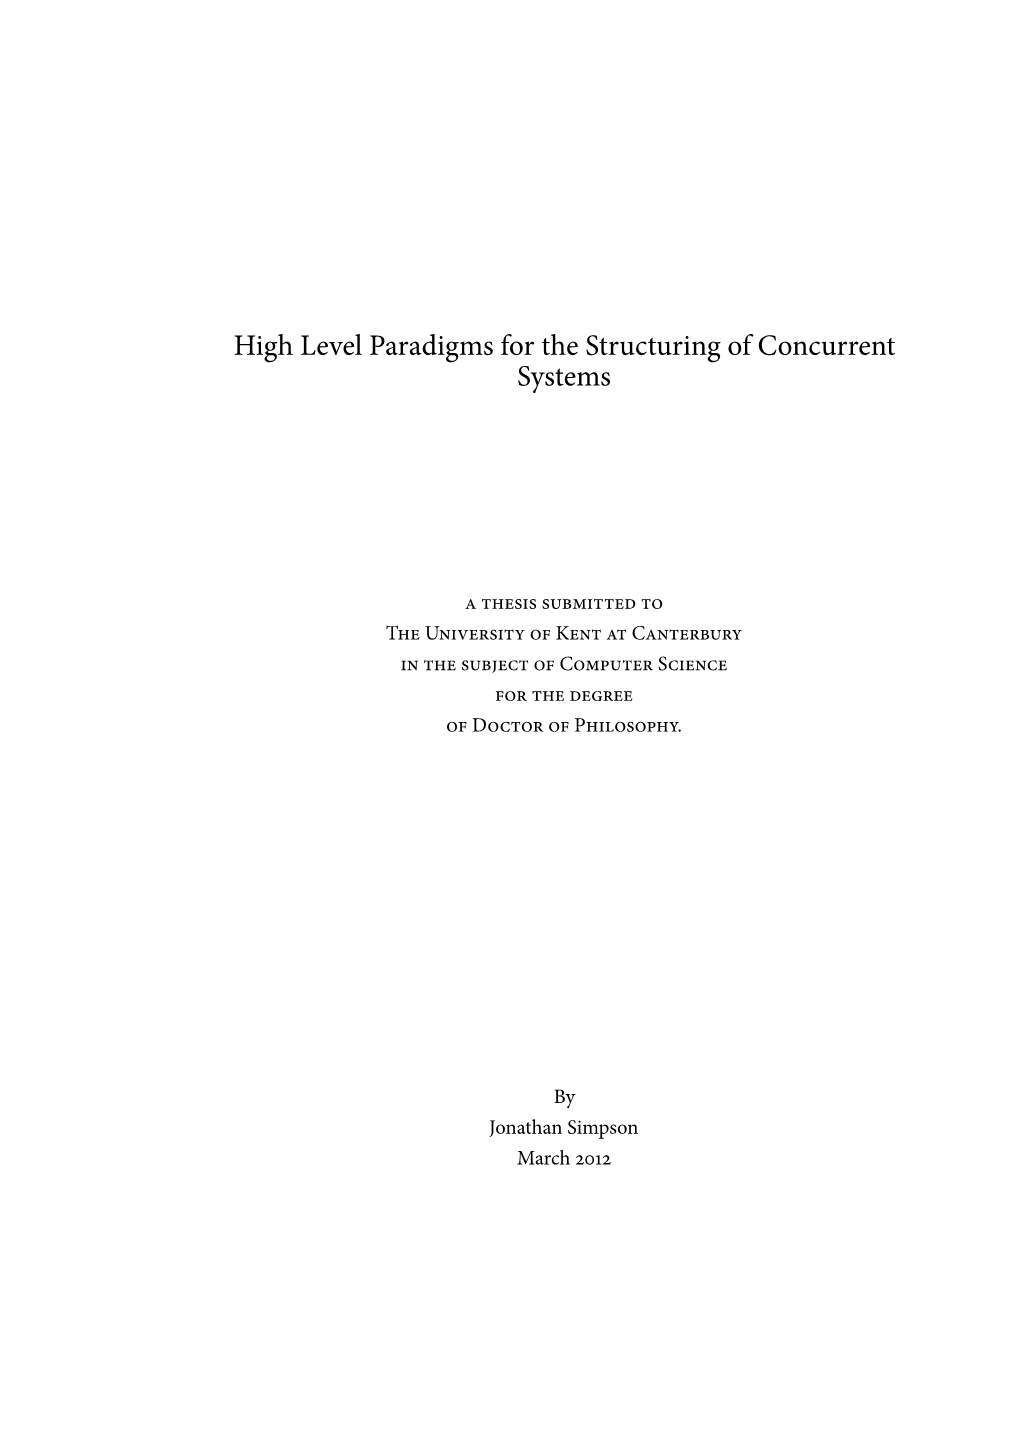 High Level Paradigms for the Structuring of Concurrent Systems